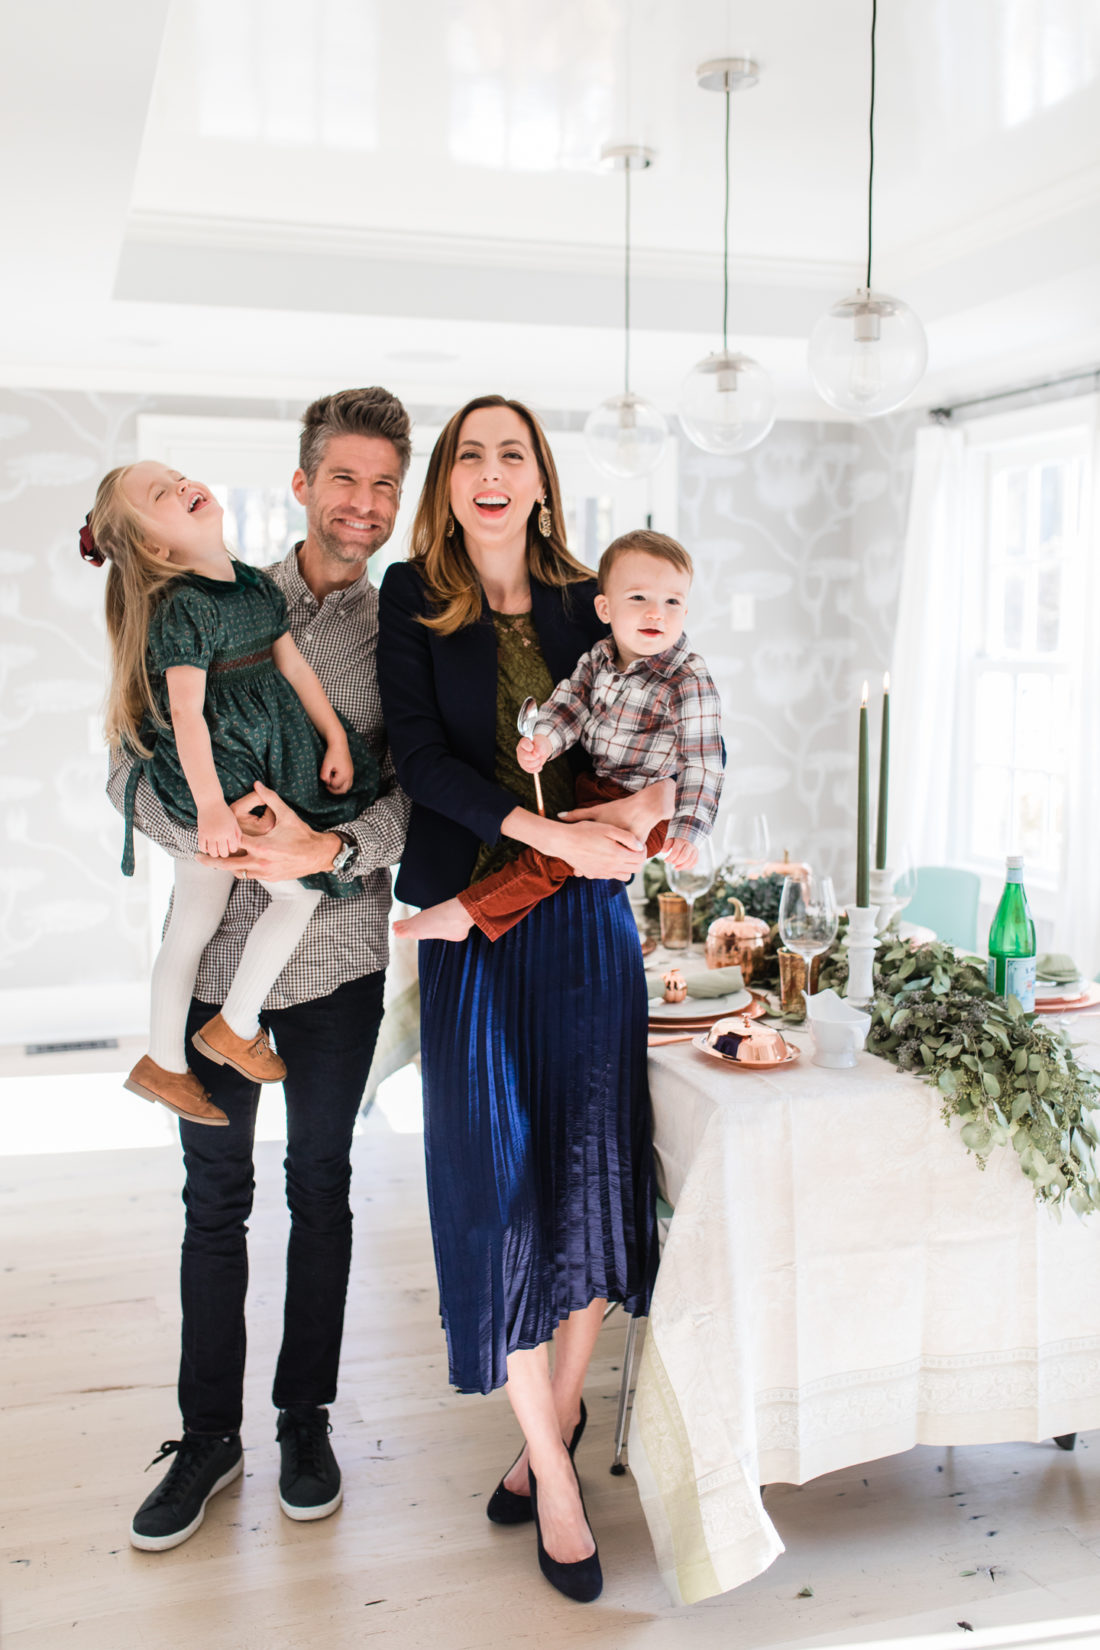 Eva Amurri martino standing with her family, Kyle Martino, Marlowe Martino, and Major Martino, in their dining room set up for Thanksgiving